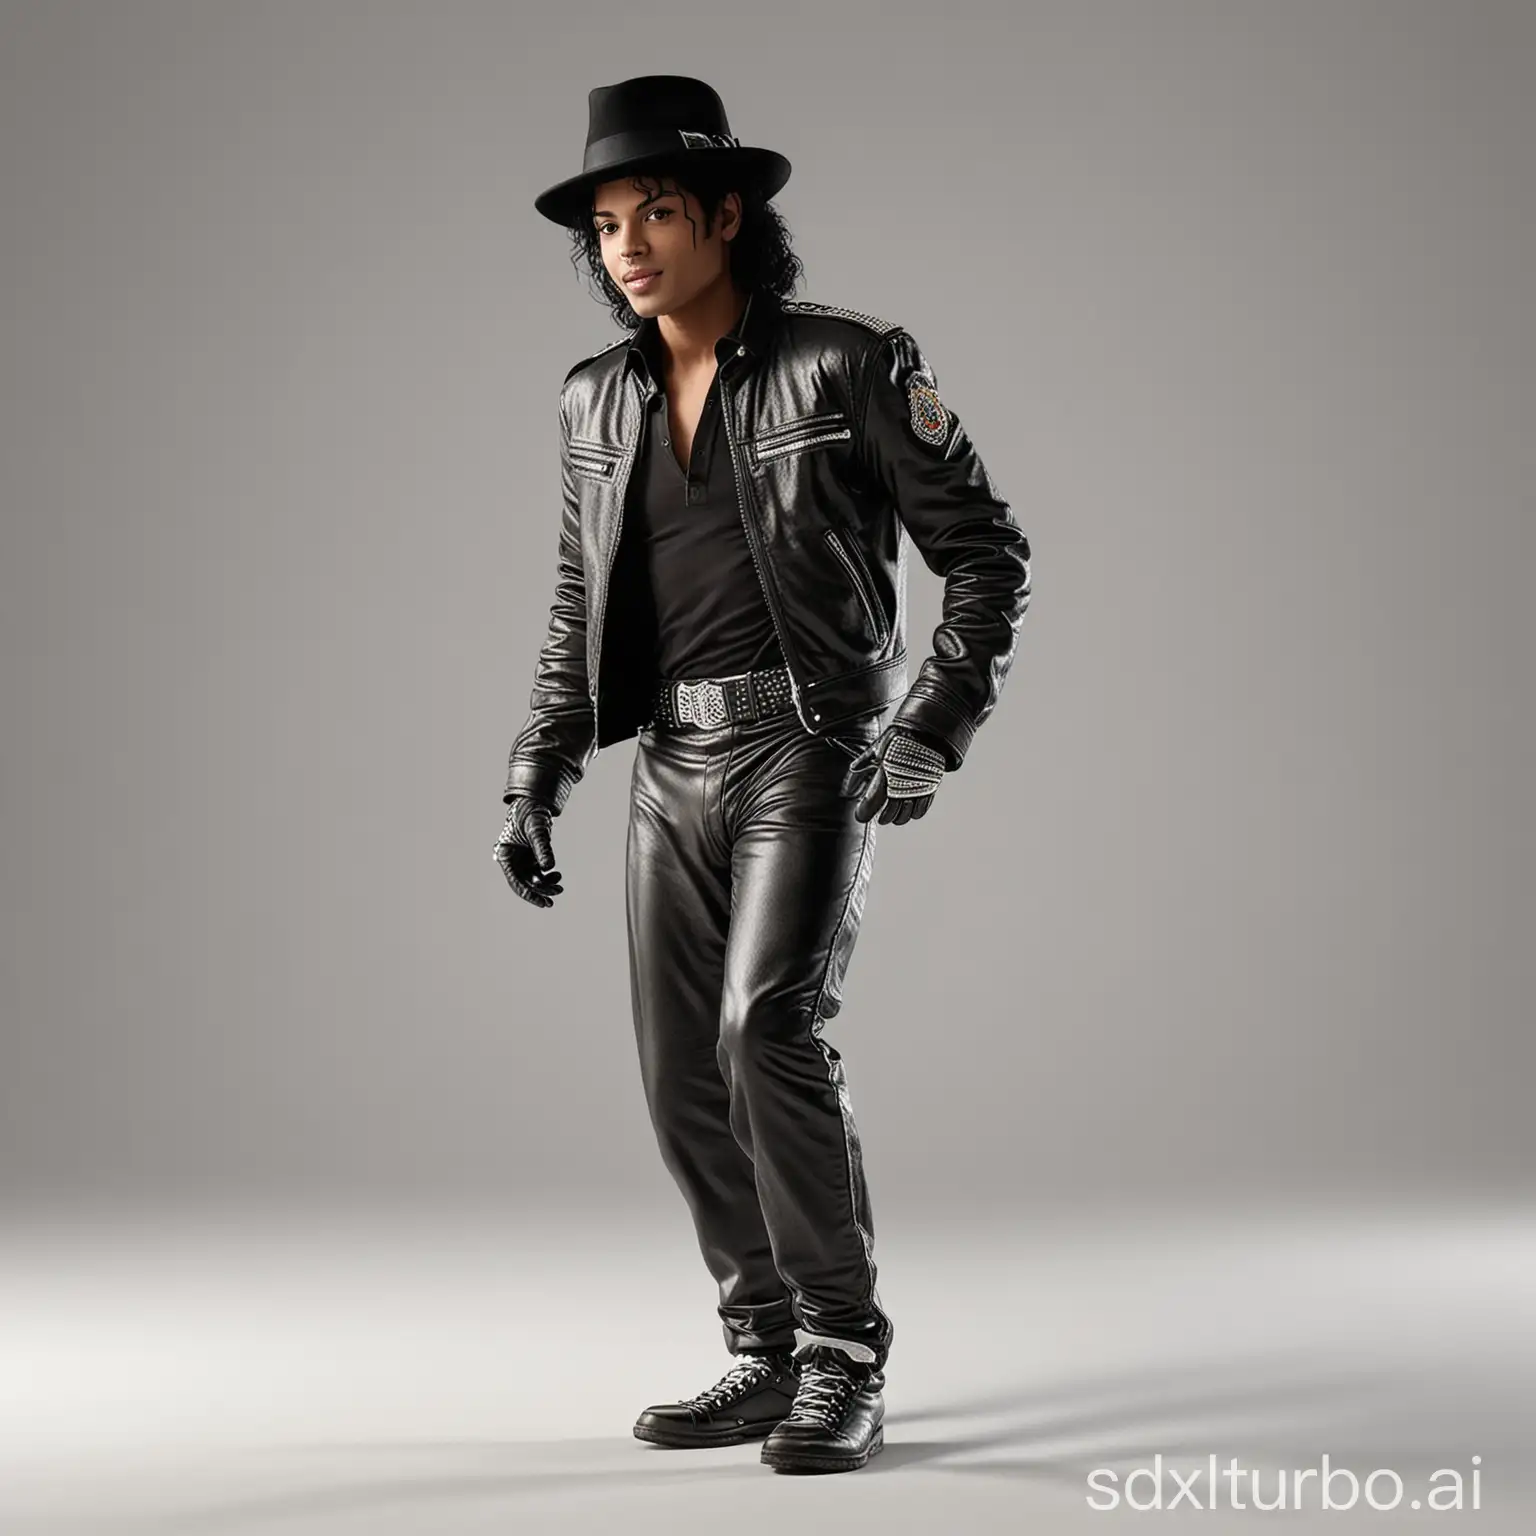 On a plain background is a Michael Jackson is doing a moonwalk. This is a full body photo realistic high resolution image with sharp clean subject focus